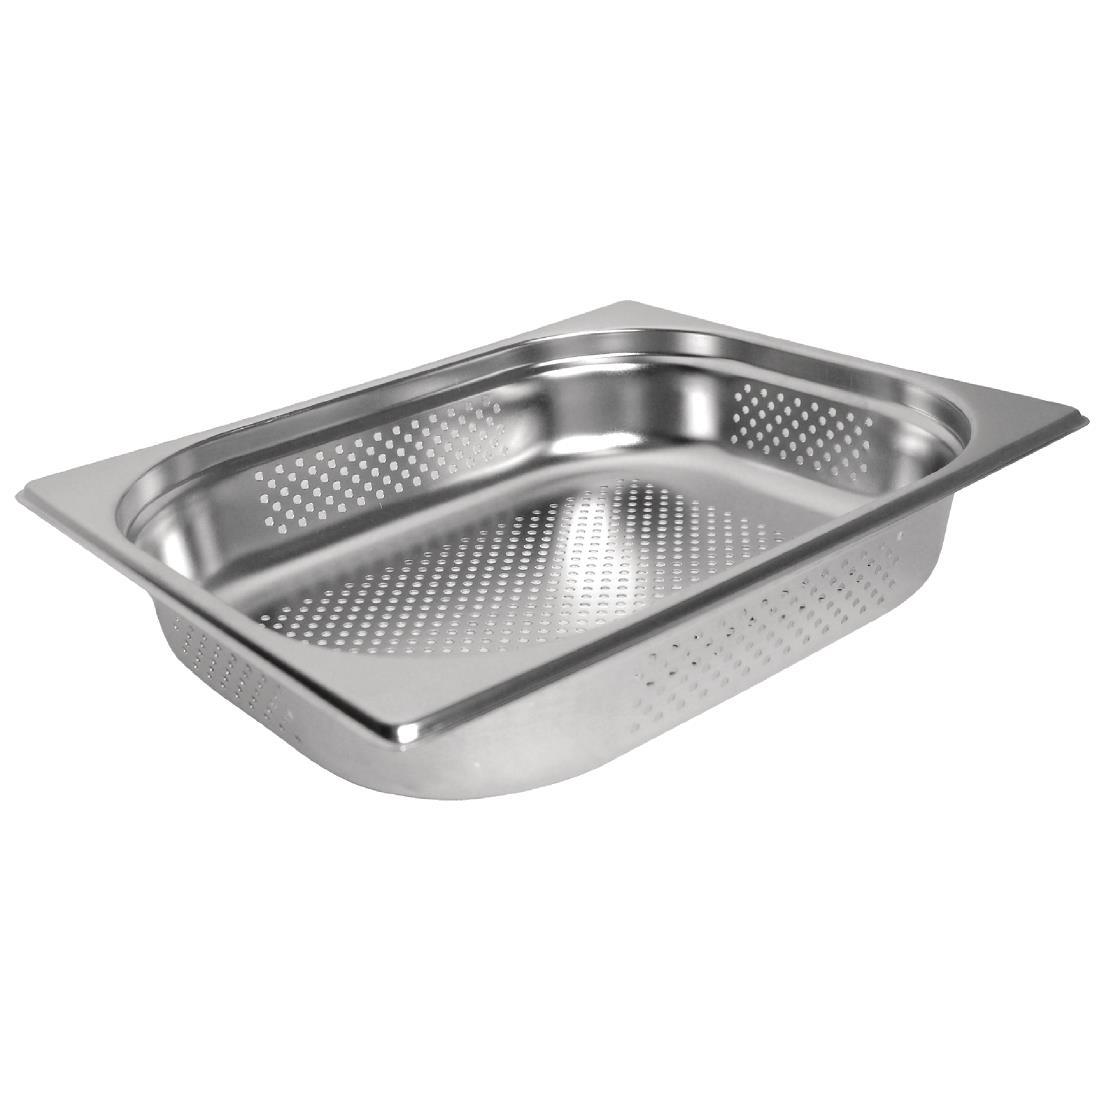 Vogue Stainless Steel Perforated 1/2 Gastronorm Pan 65mm - K844  - 1